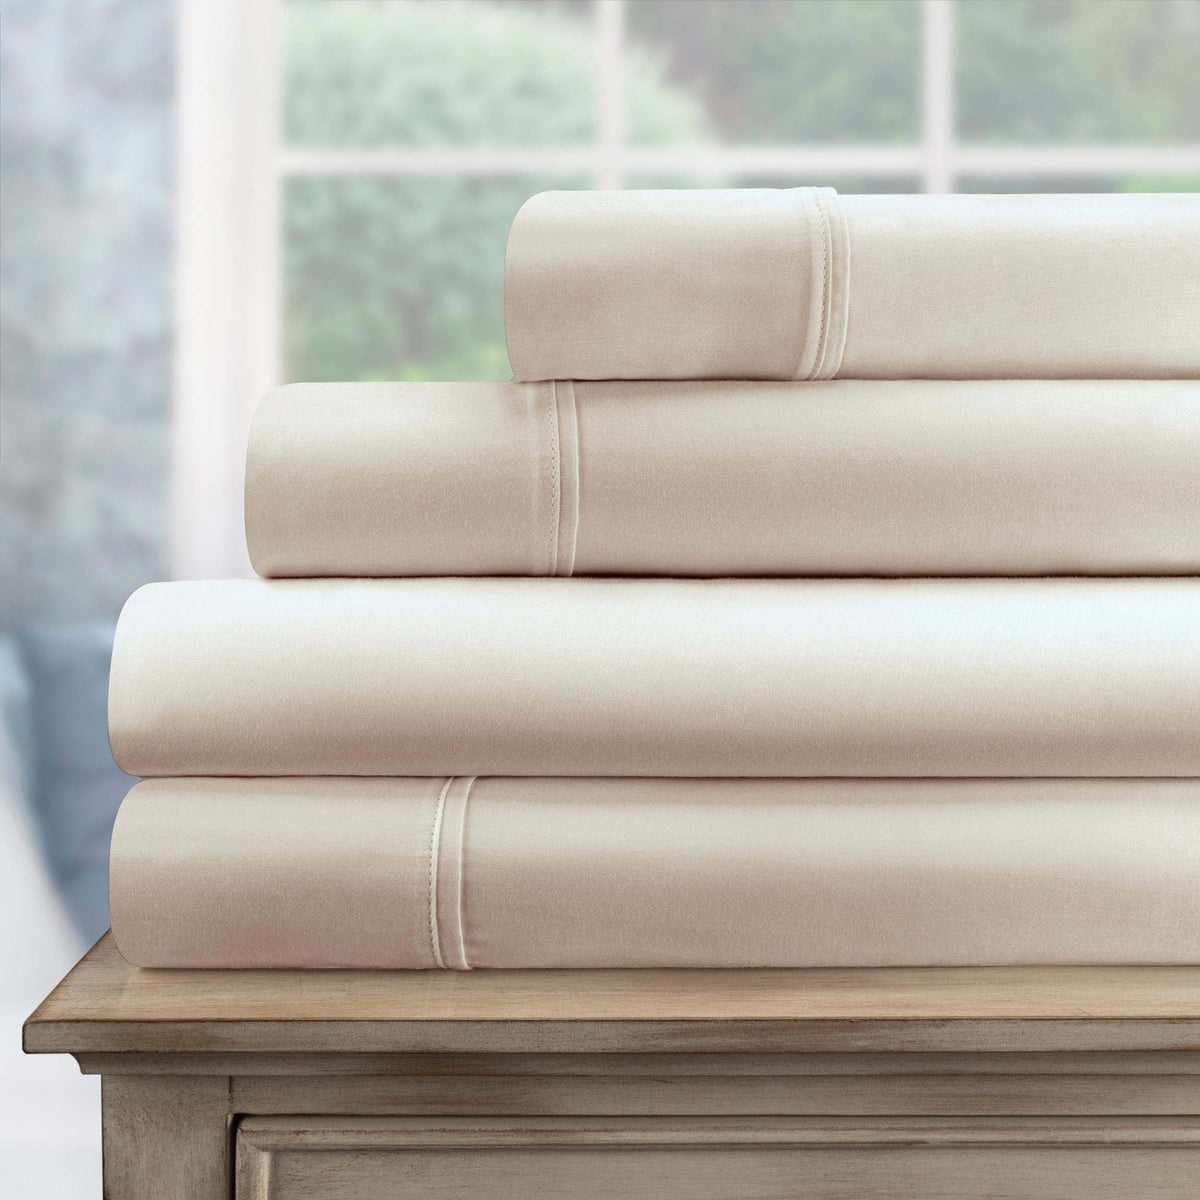 Egyptian Cotton 700 Thread Count Eco Friendly Solid Sheet Set - Ivory